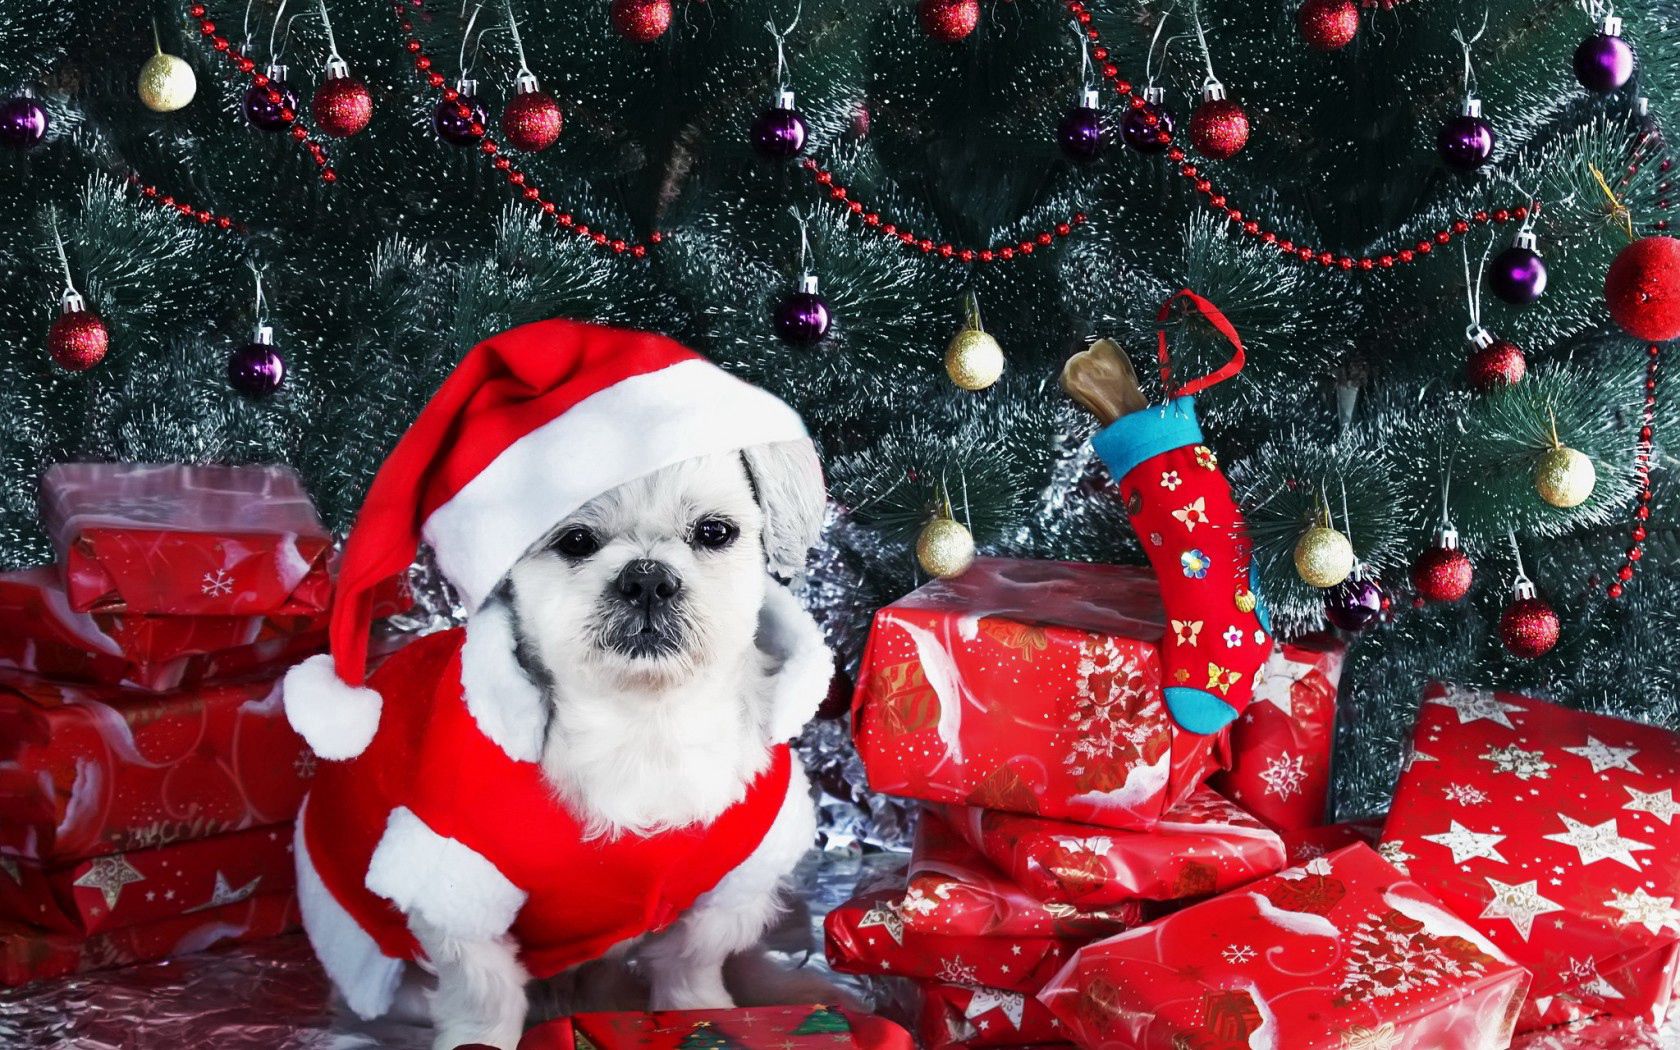 holidays, new year, decorations, dog, christmas tree, presents, gifts